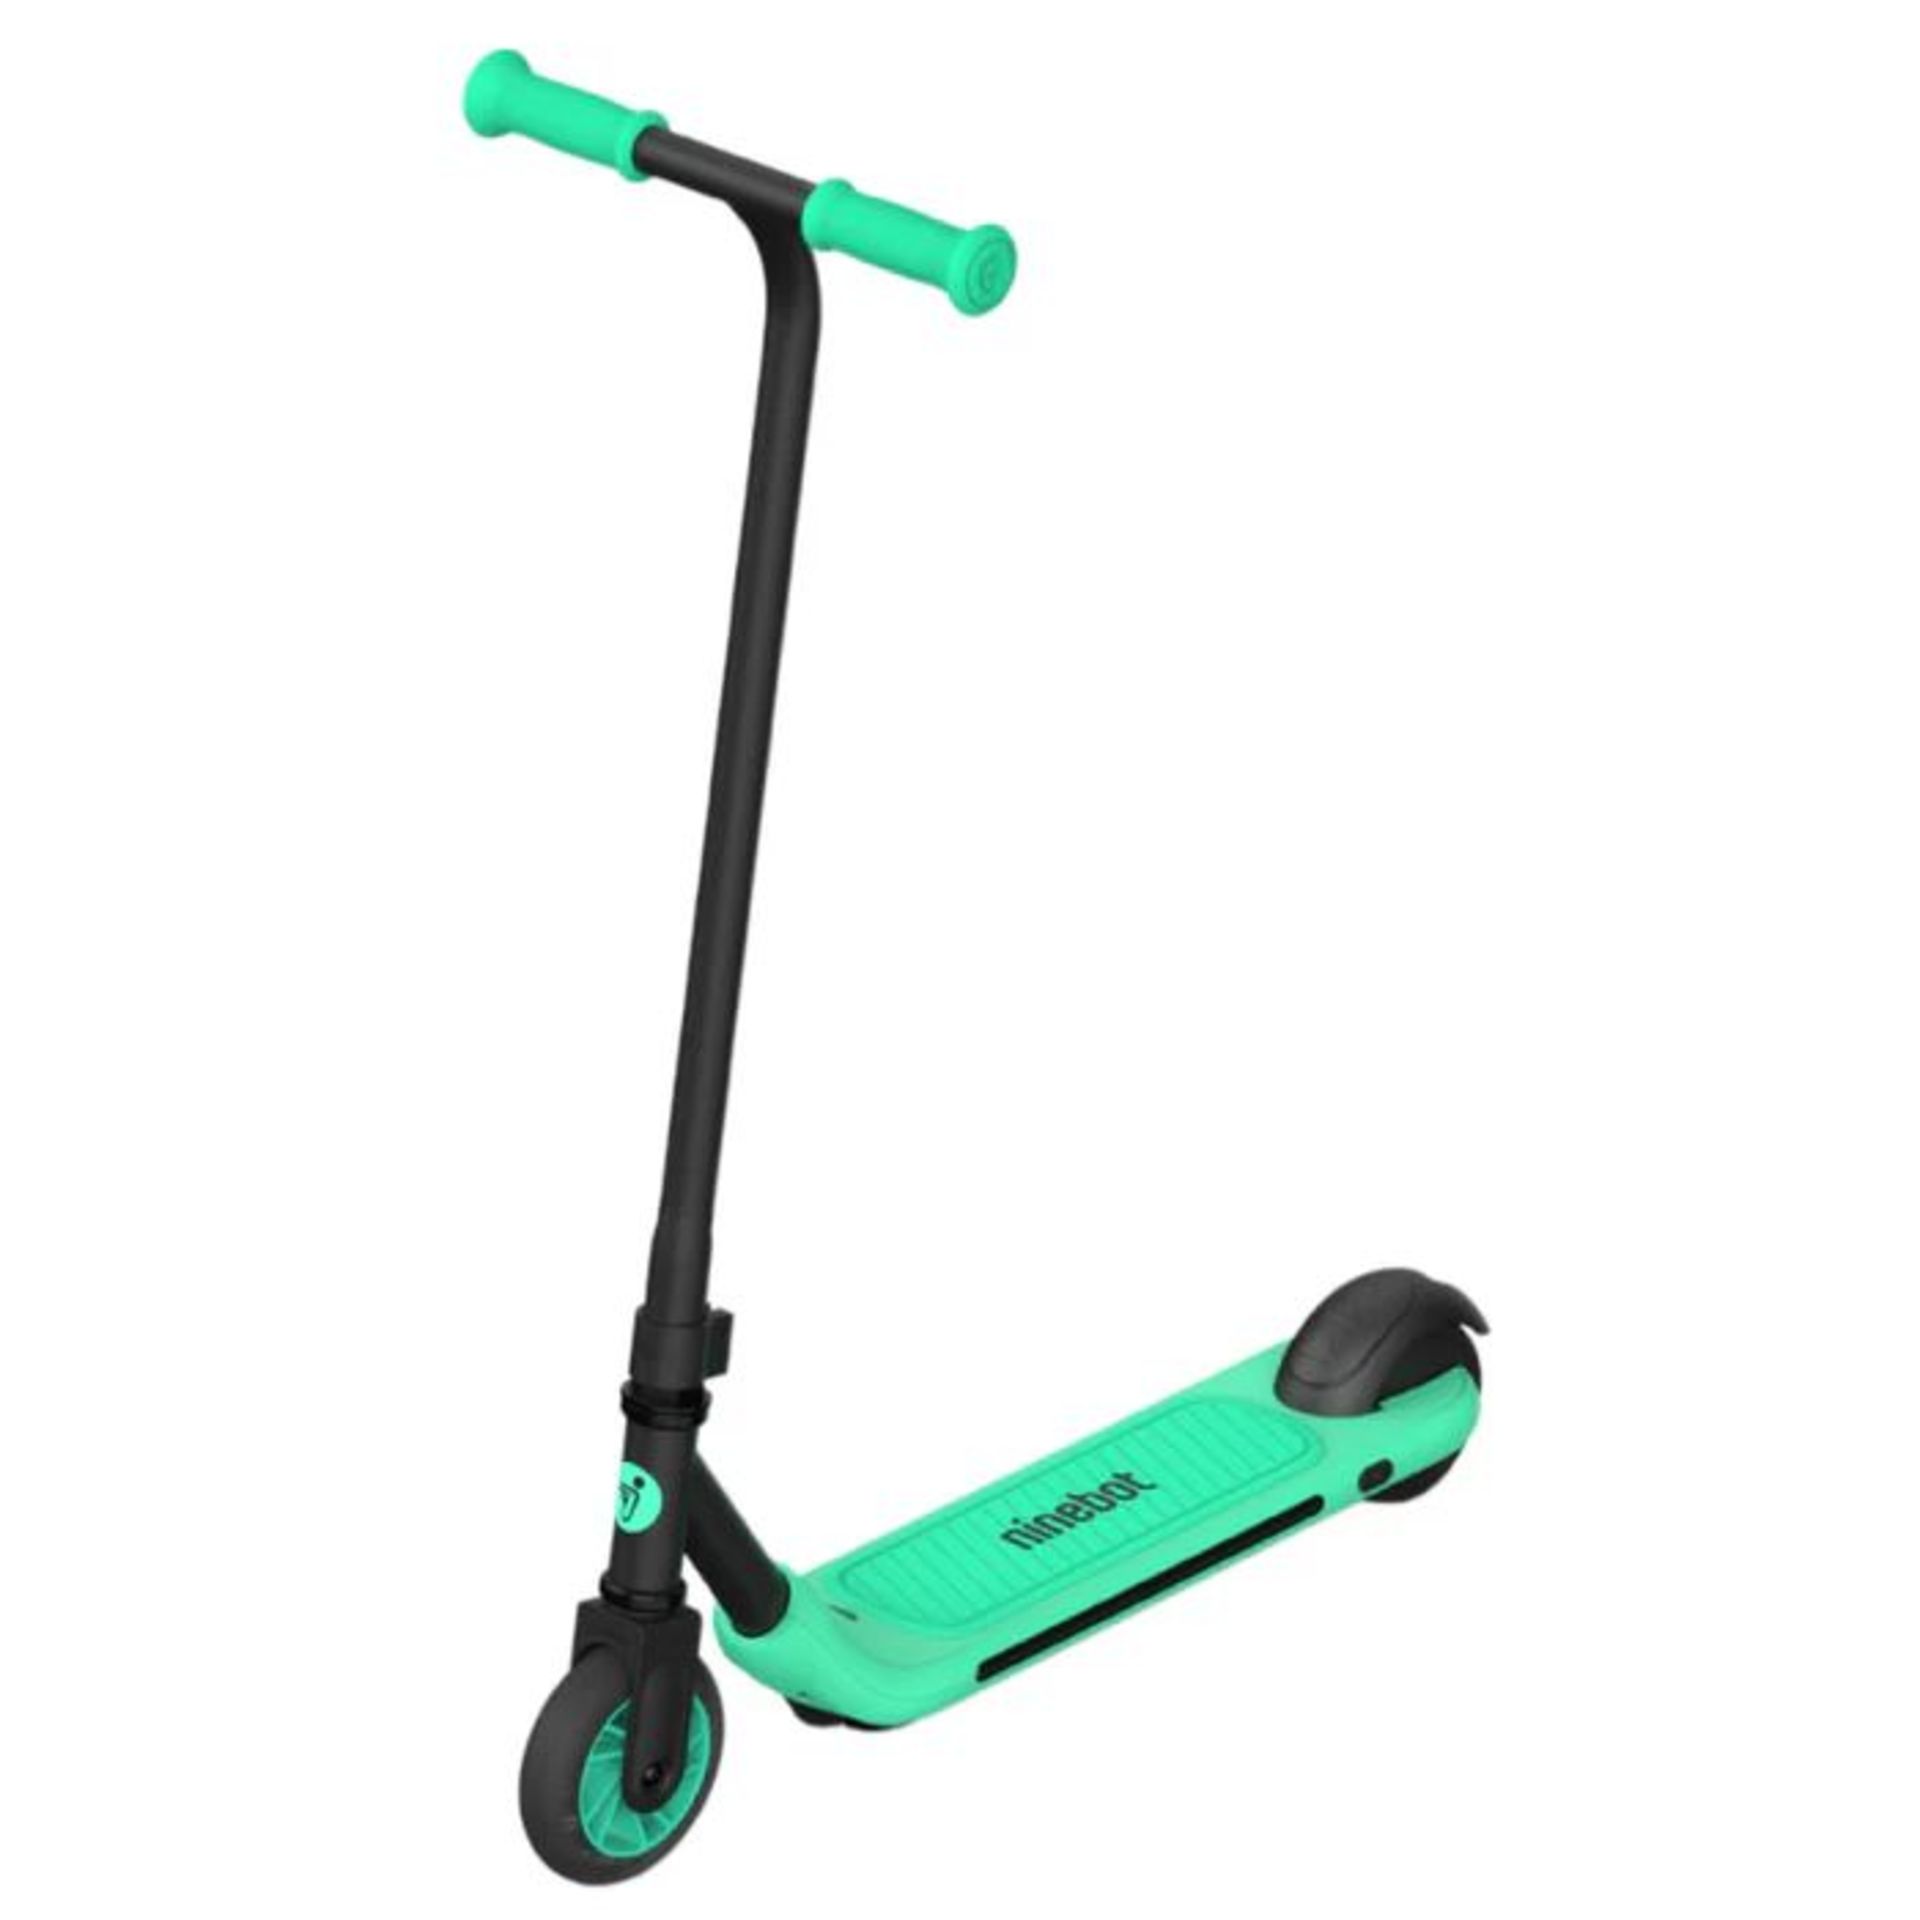 SEGWAY NINEBOT ELECTRIC ASSIST E-KICK SCOOTER (FACTORY RECERTIFIED - 30 DAY WARRANTY INCLUDED)